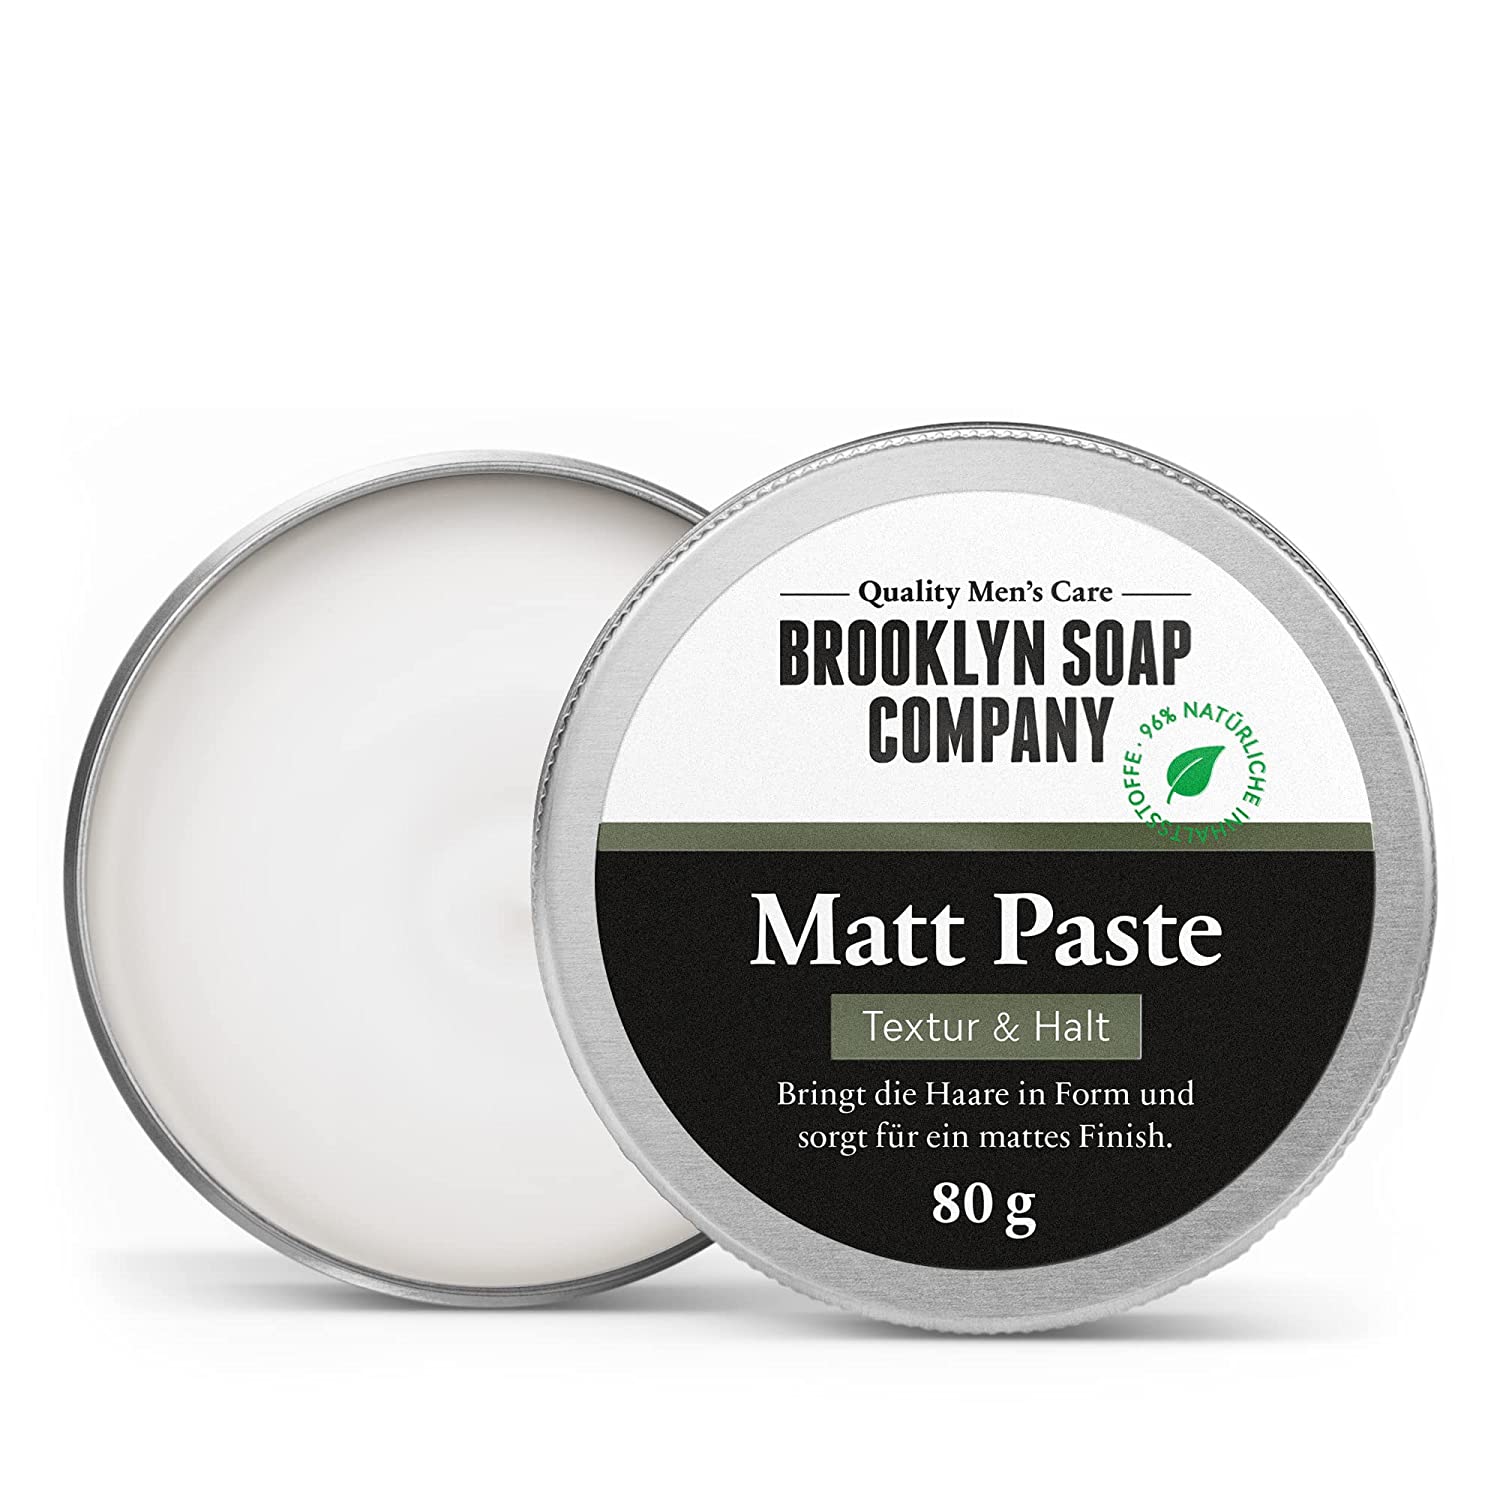 company Matt paste (80 g), Brooklyn Soap Company, Hair Styling for a Natural Hold, Without Sticking